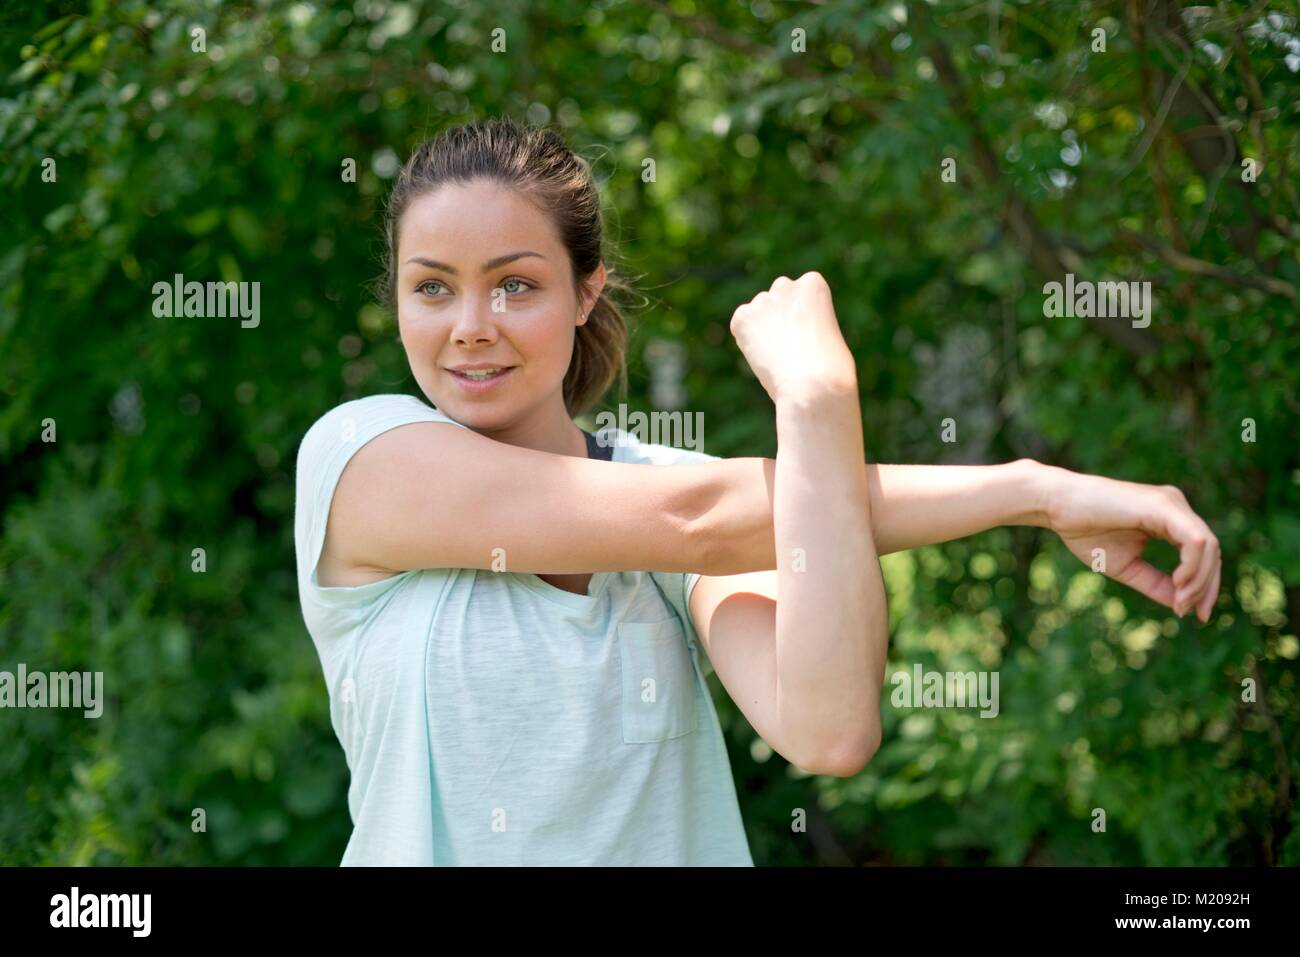 Young woman stretching before exercise. Stock Photo